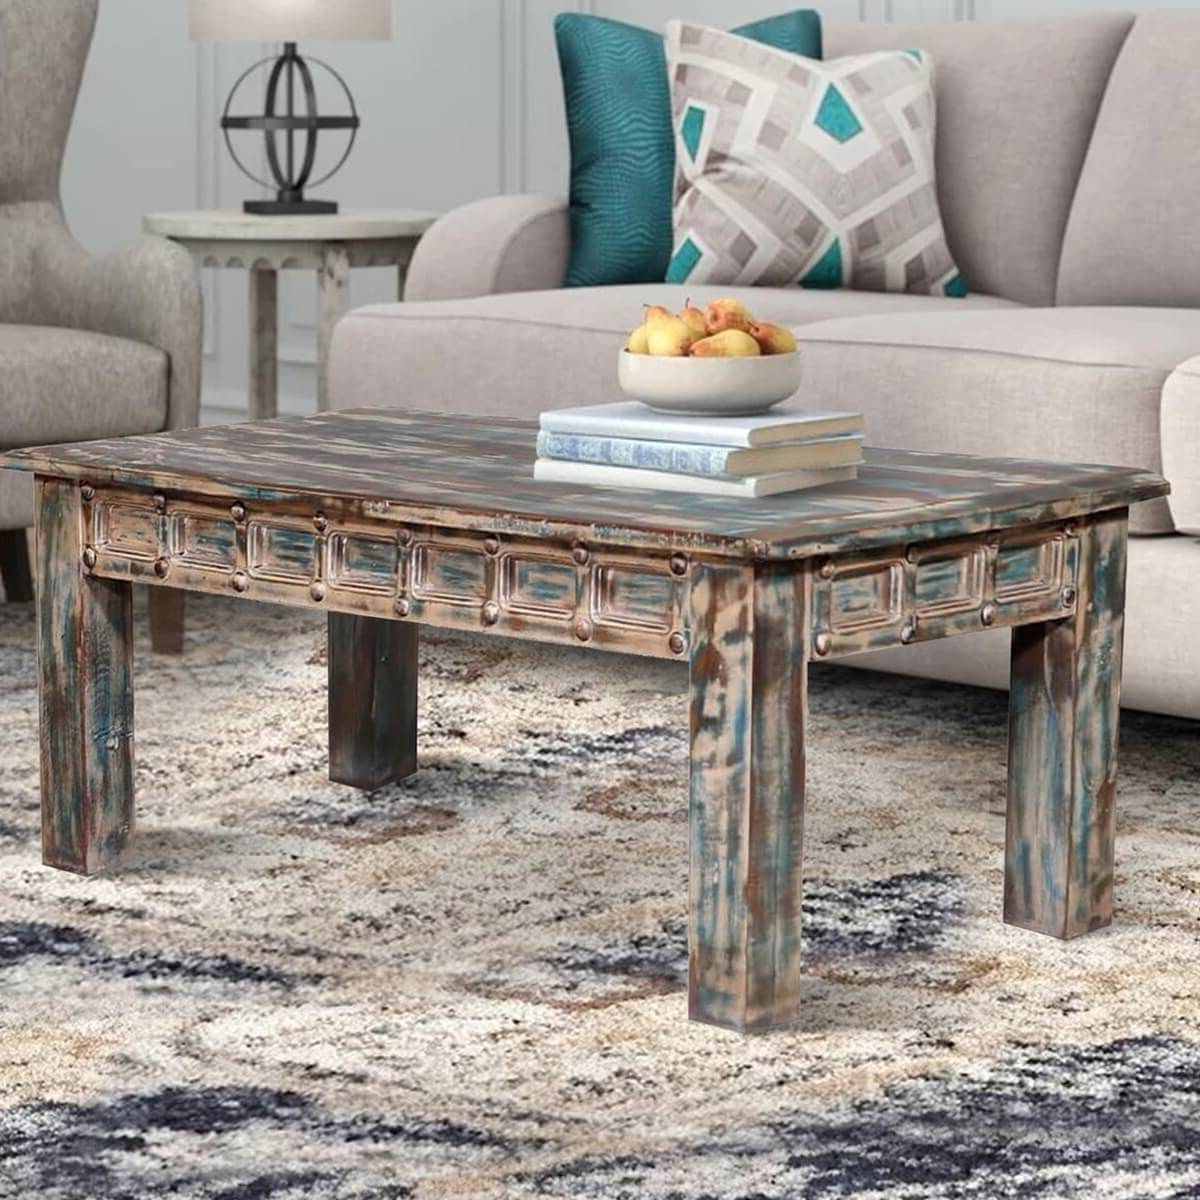 Parkdale Distressed Reclaimed Wood Rustic Coffee Table With Best And Newest Reclaimed Wood Coffee Tables (View 9 of 20)